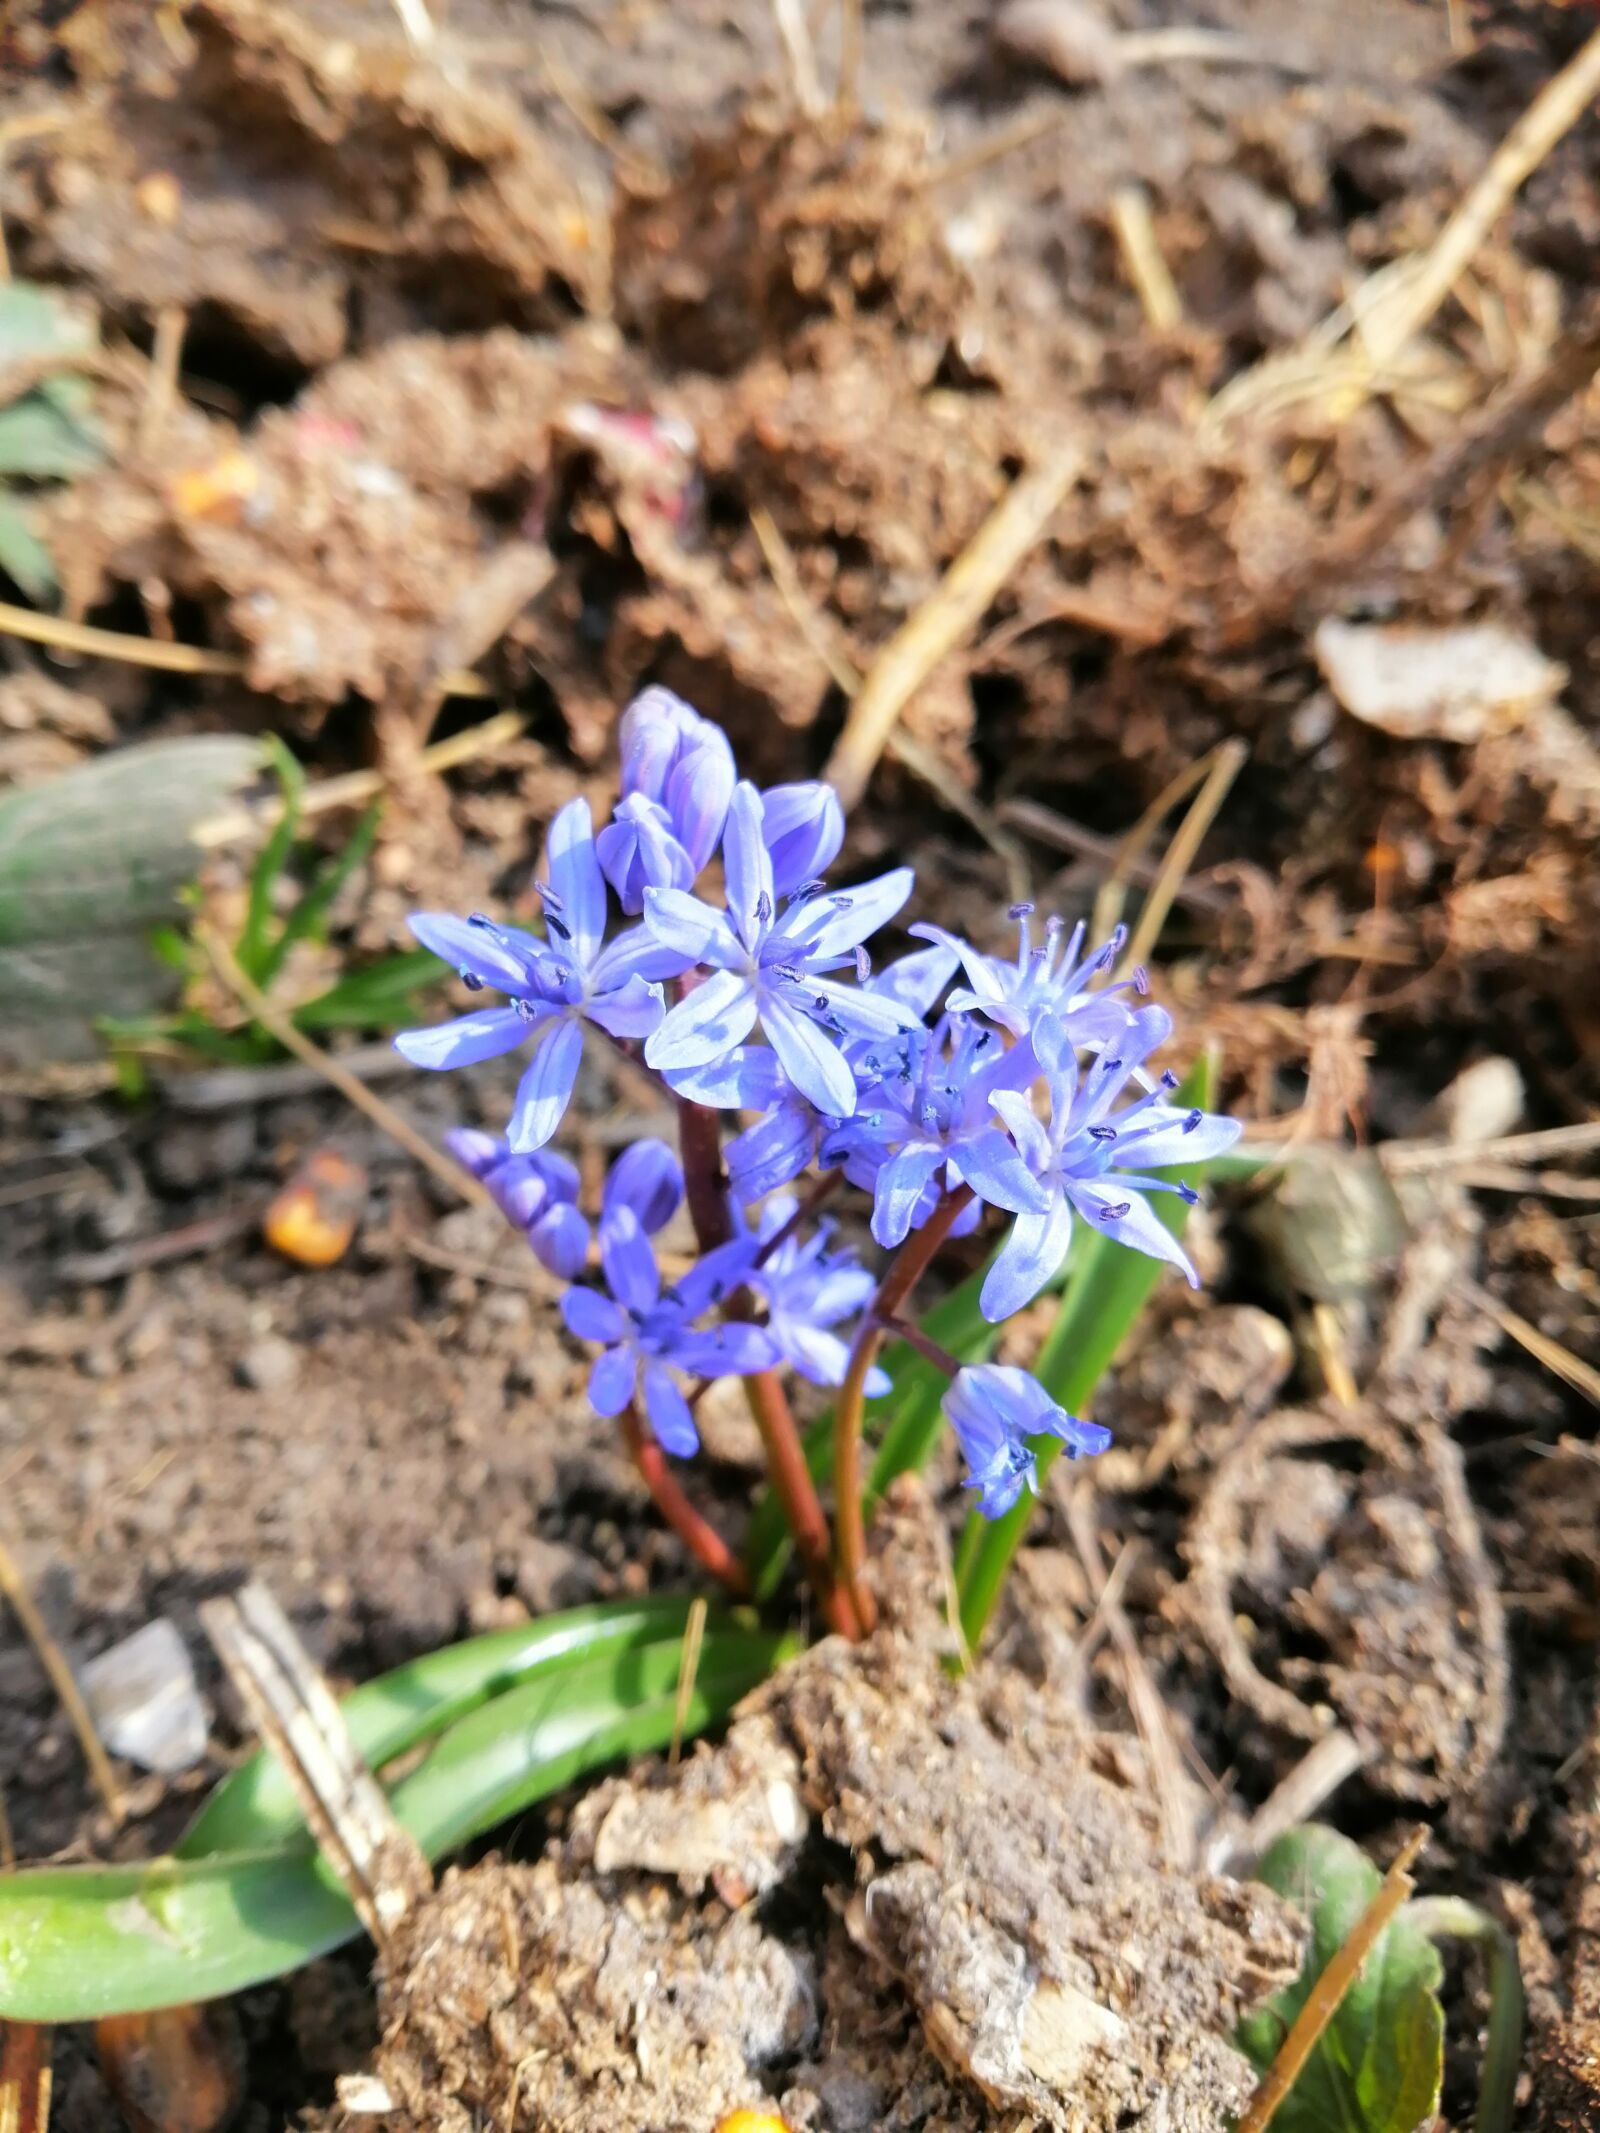 HUAWEI INE-LX1 sample photo. Flower, flowers, spring photography